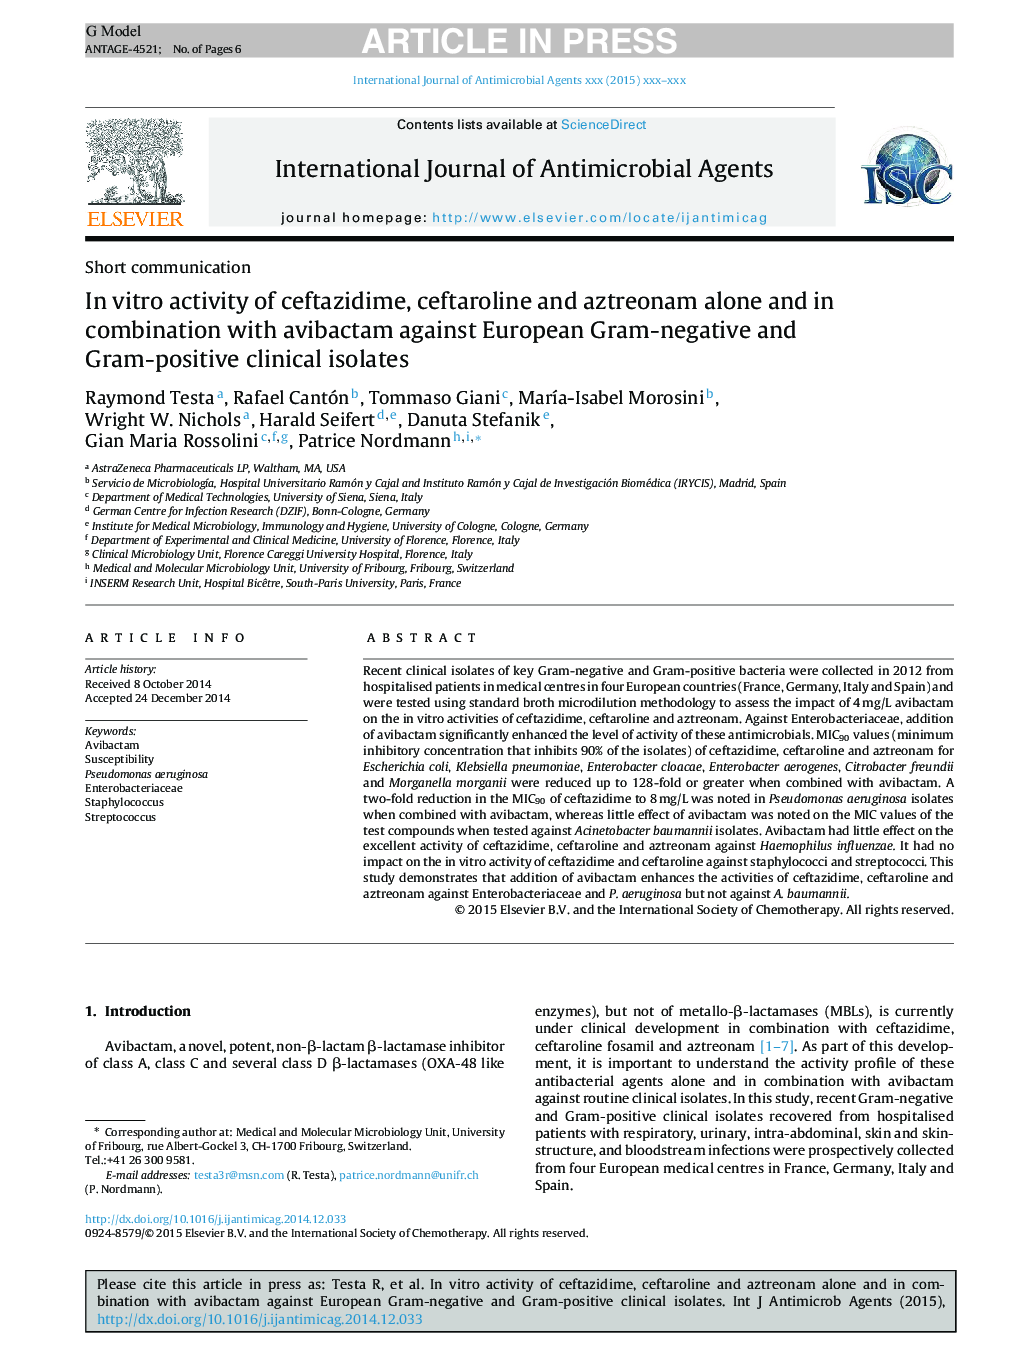 In vitro activity of ceftazidime, ceftaroline and aztreonam alone and in combination with avibactam against European Gram-negative and Gram-positive clinical isolates